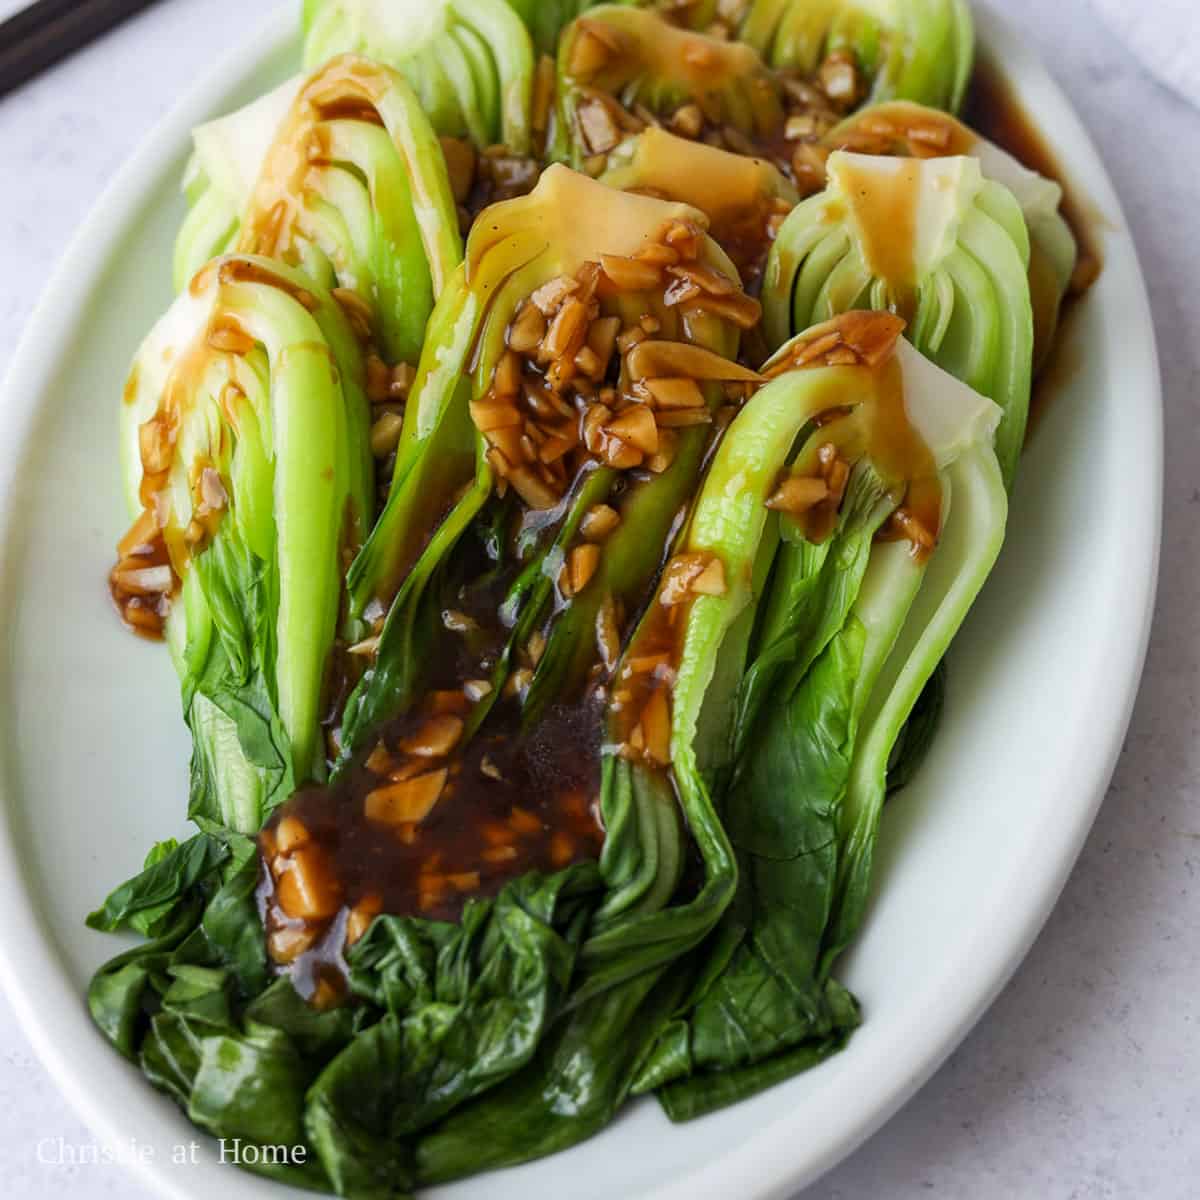 pour sauce over the cooked bok choy